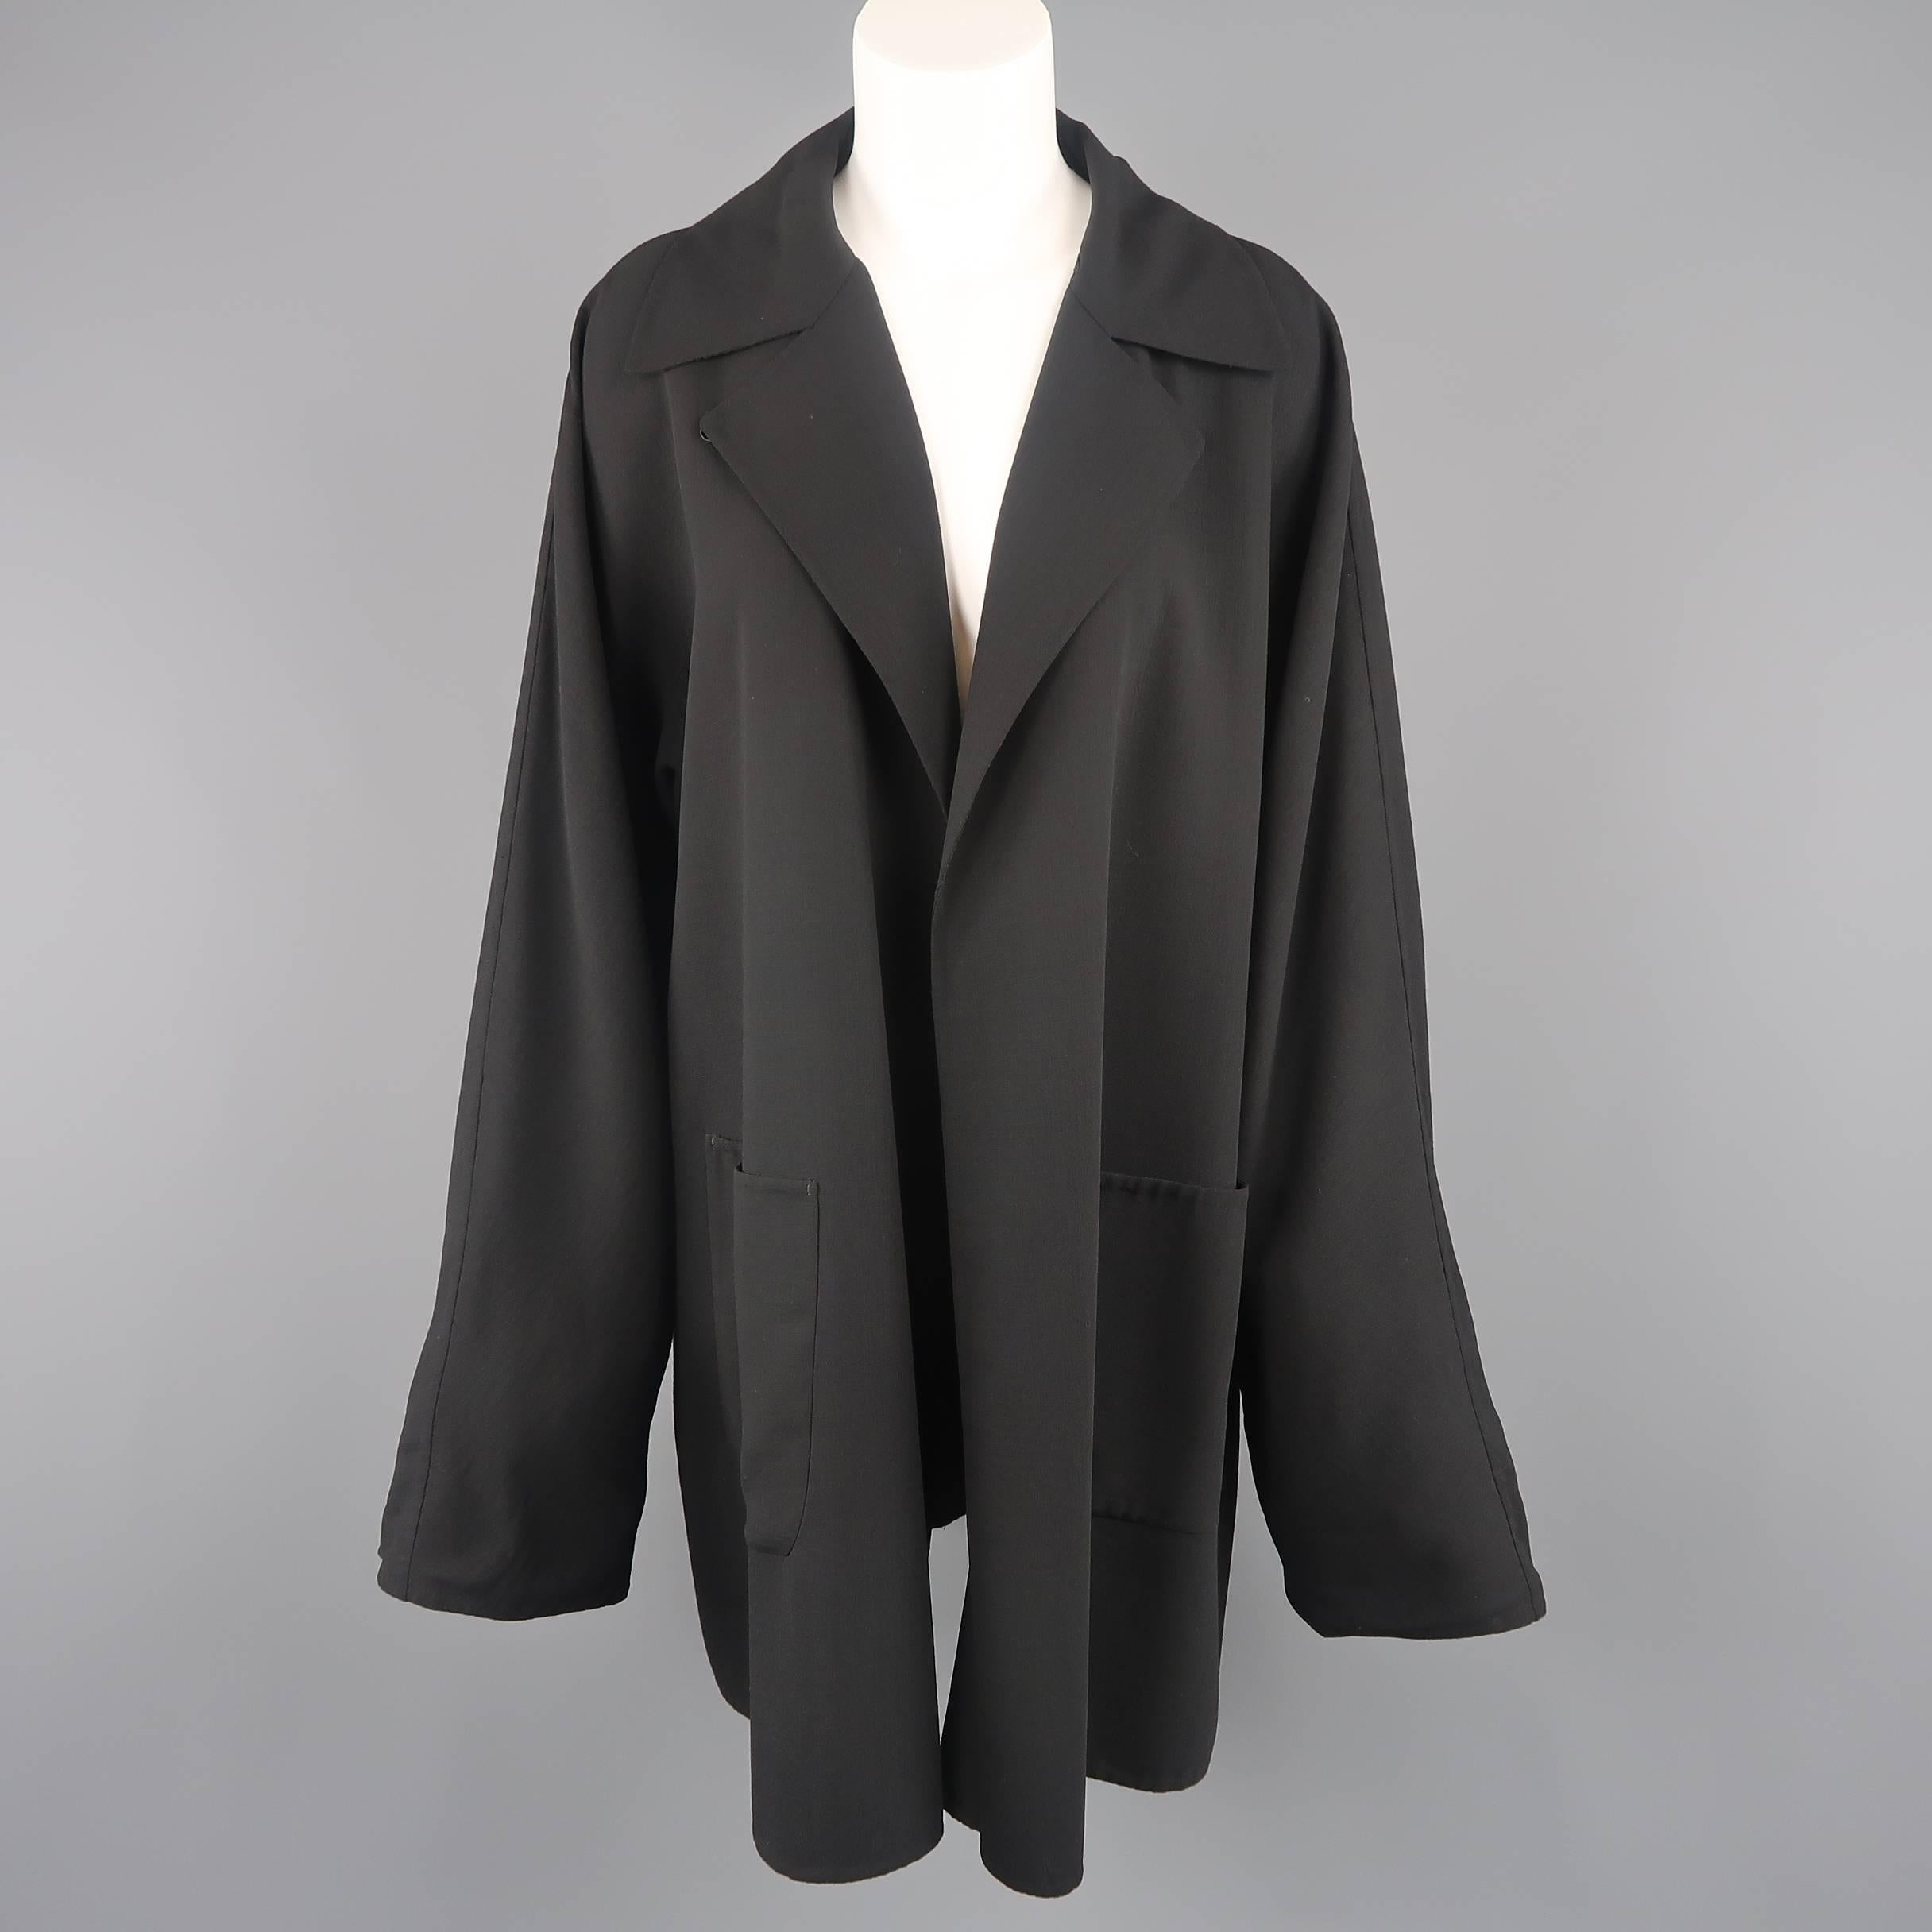 Vintage Jil Sander coat comes in light weight fabric with a pointed collar, patch pockets, and button over closure. Tags cut out. As-is.
 
Good Pre-Owned Condition.
Marked: (no size)
 
Measurements:
 
Shoulder: 21 in.
Bust: 50 in.
Sleeve: 28